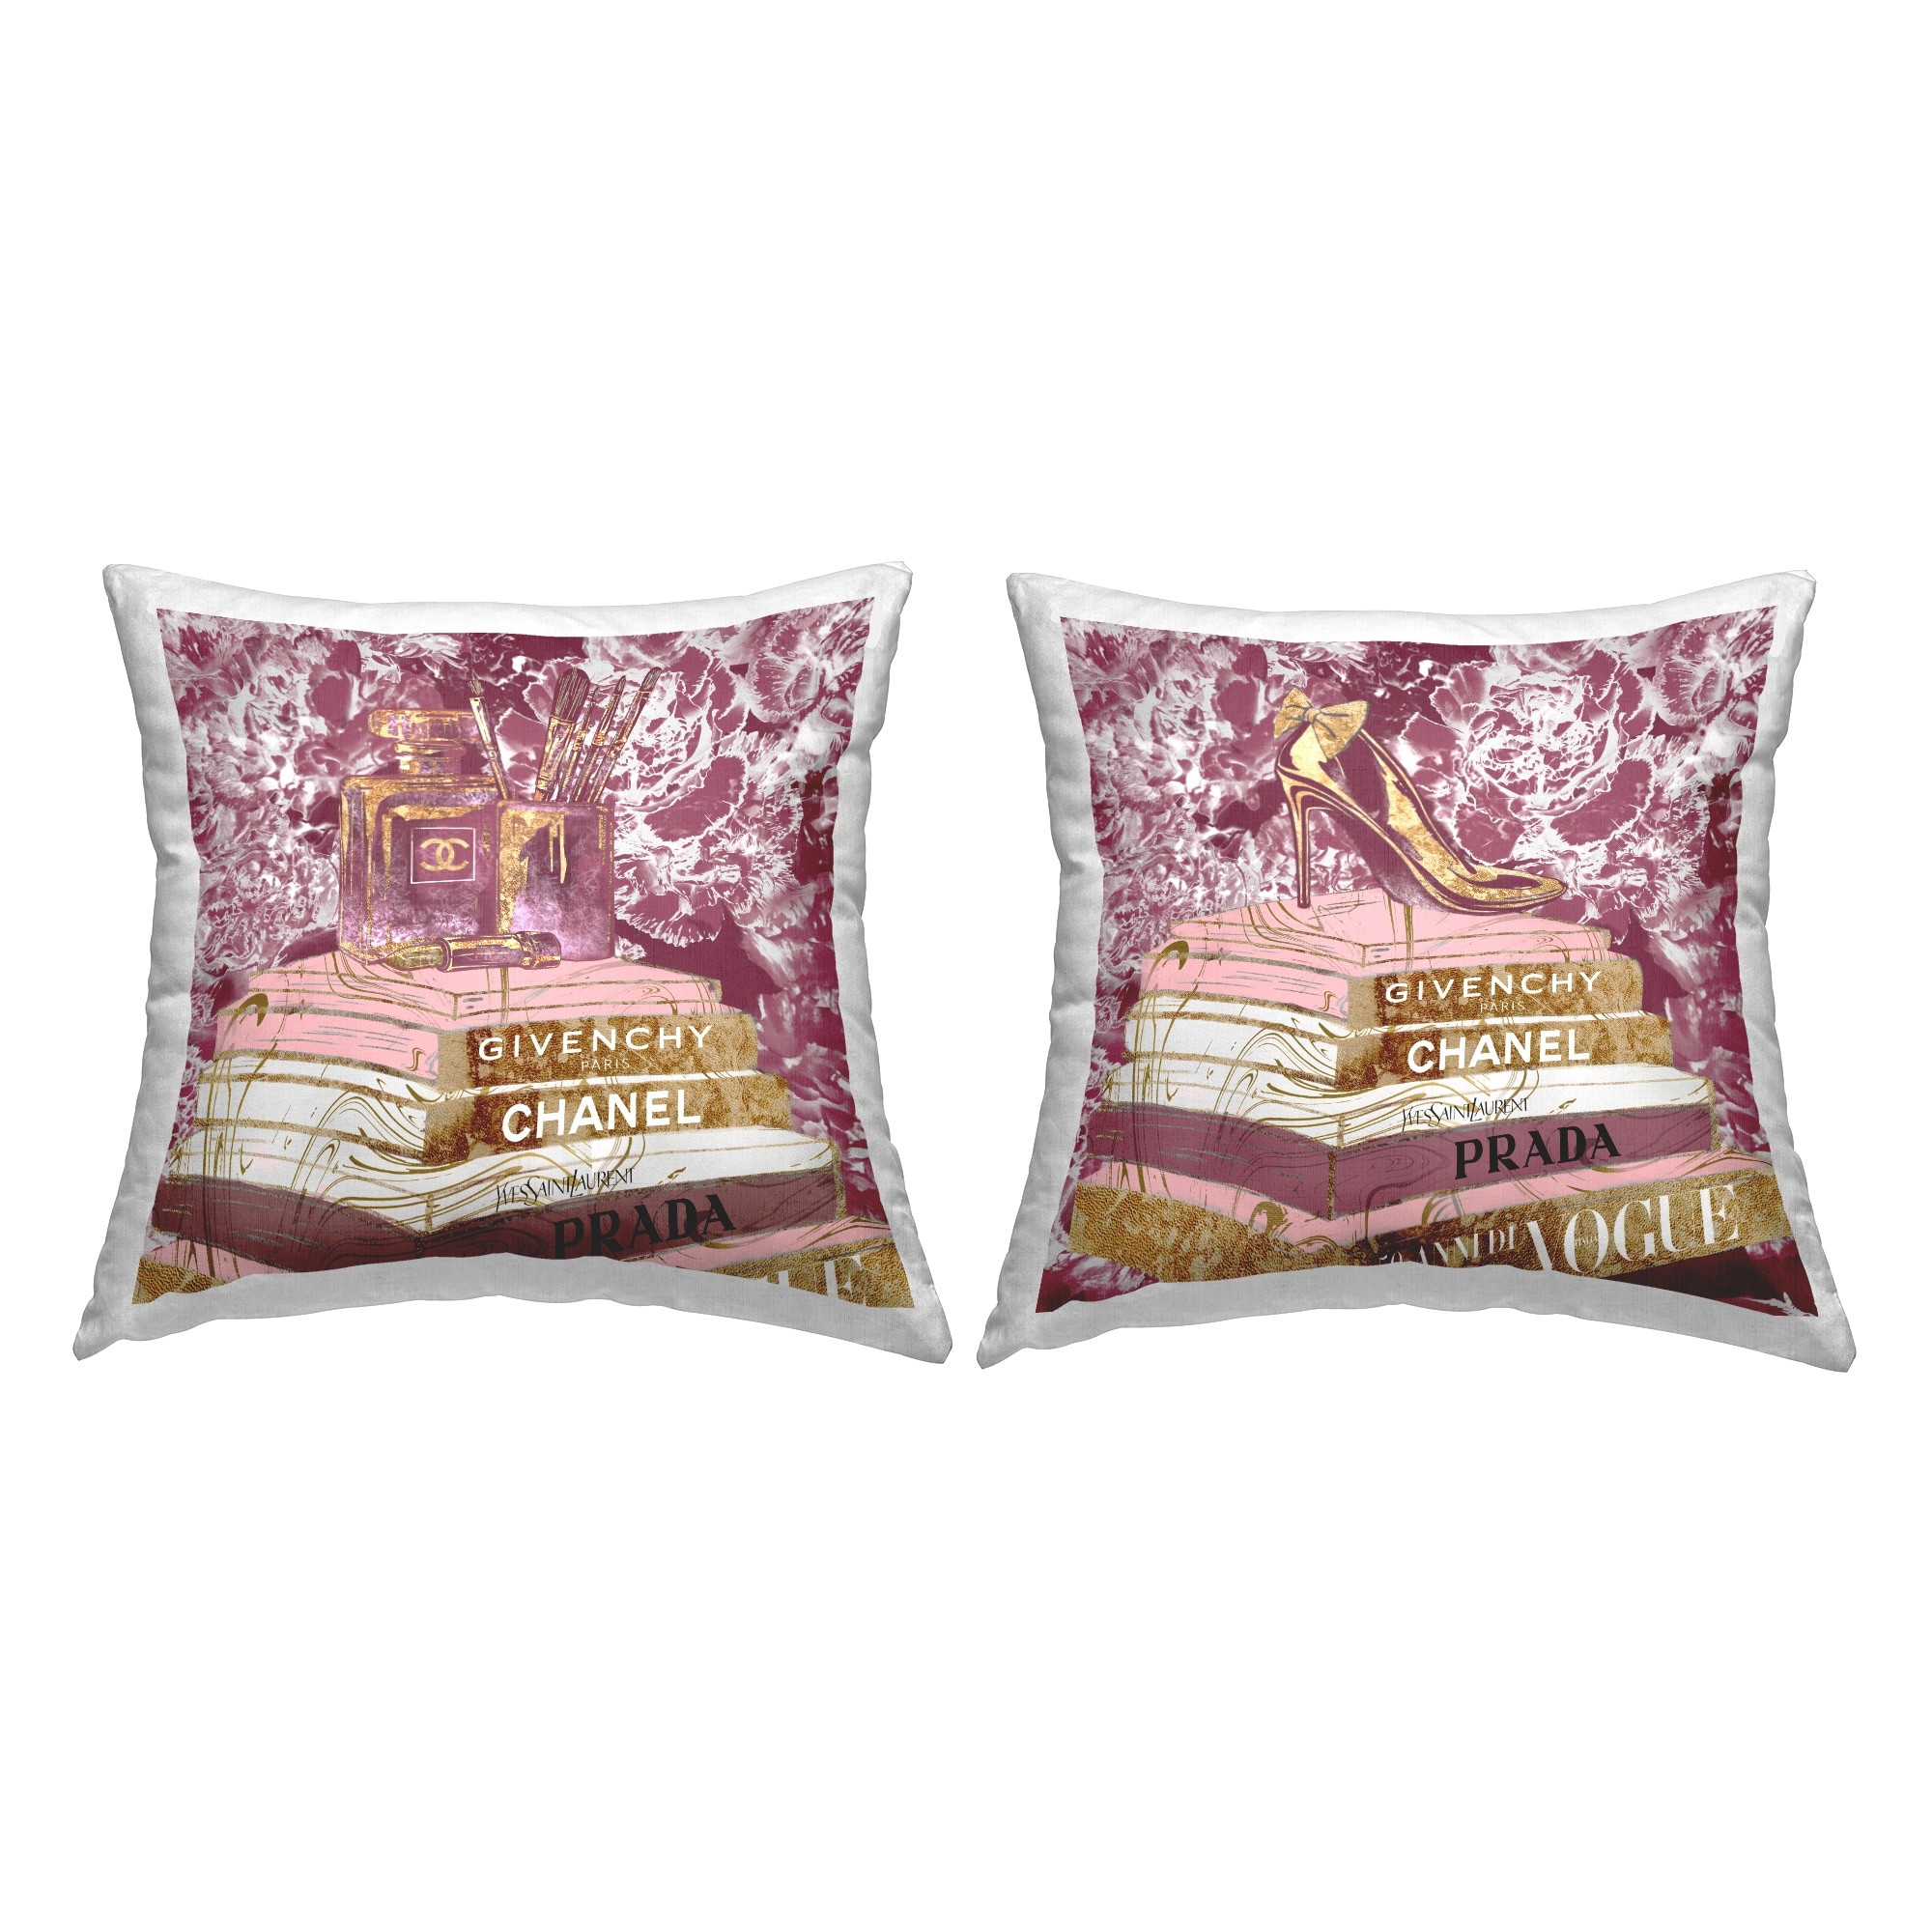 Stupell Industries Pink Fashion Glam Book Stacks Perfume Heel Decorative  Printed Throw Pillows by Ziwei Li (Set of 2) - On Sale - Bed Bath & Beyond  - 36195295